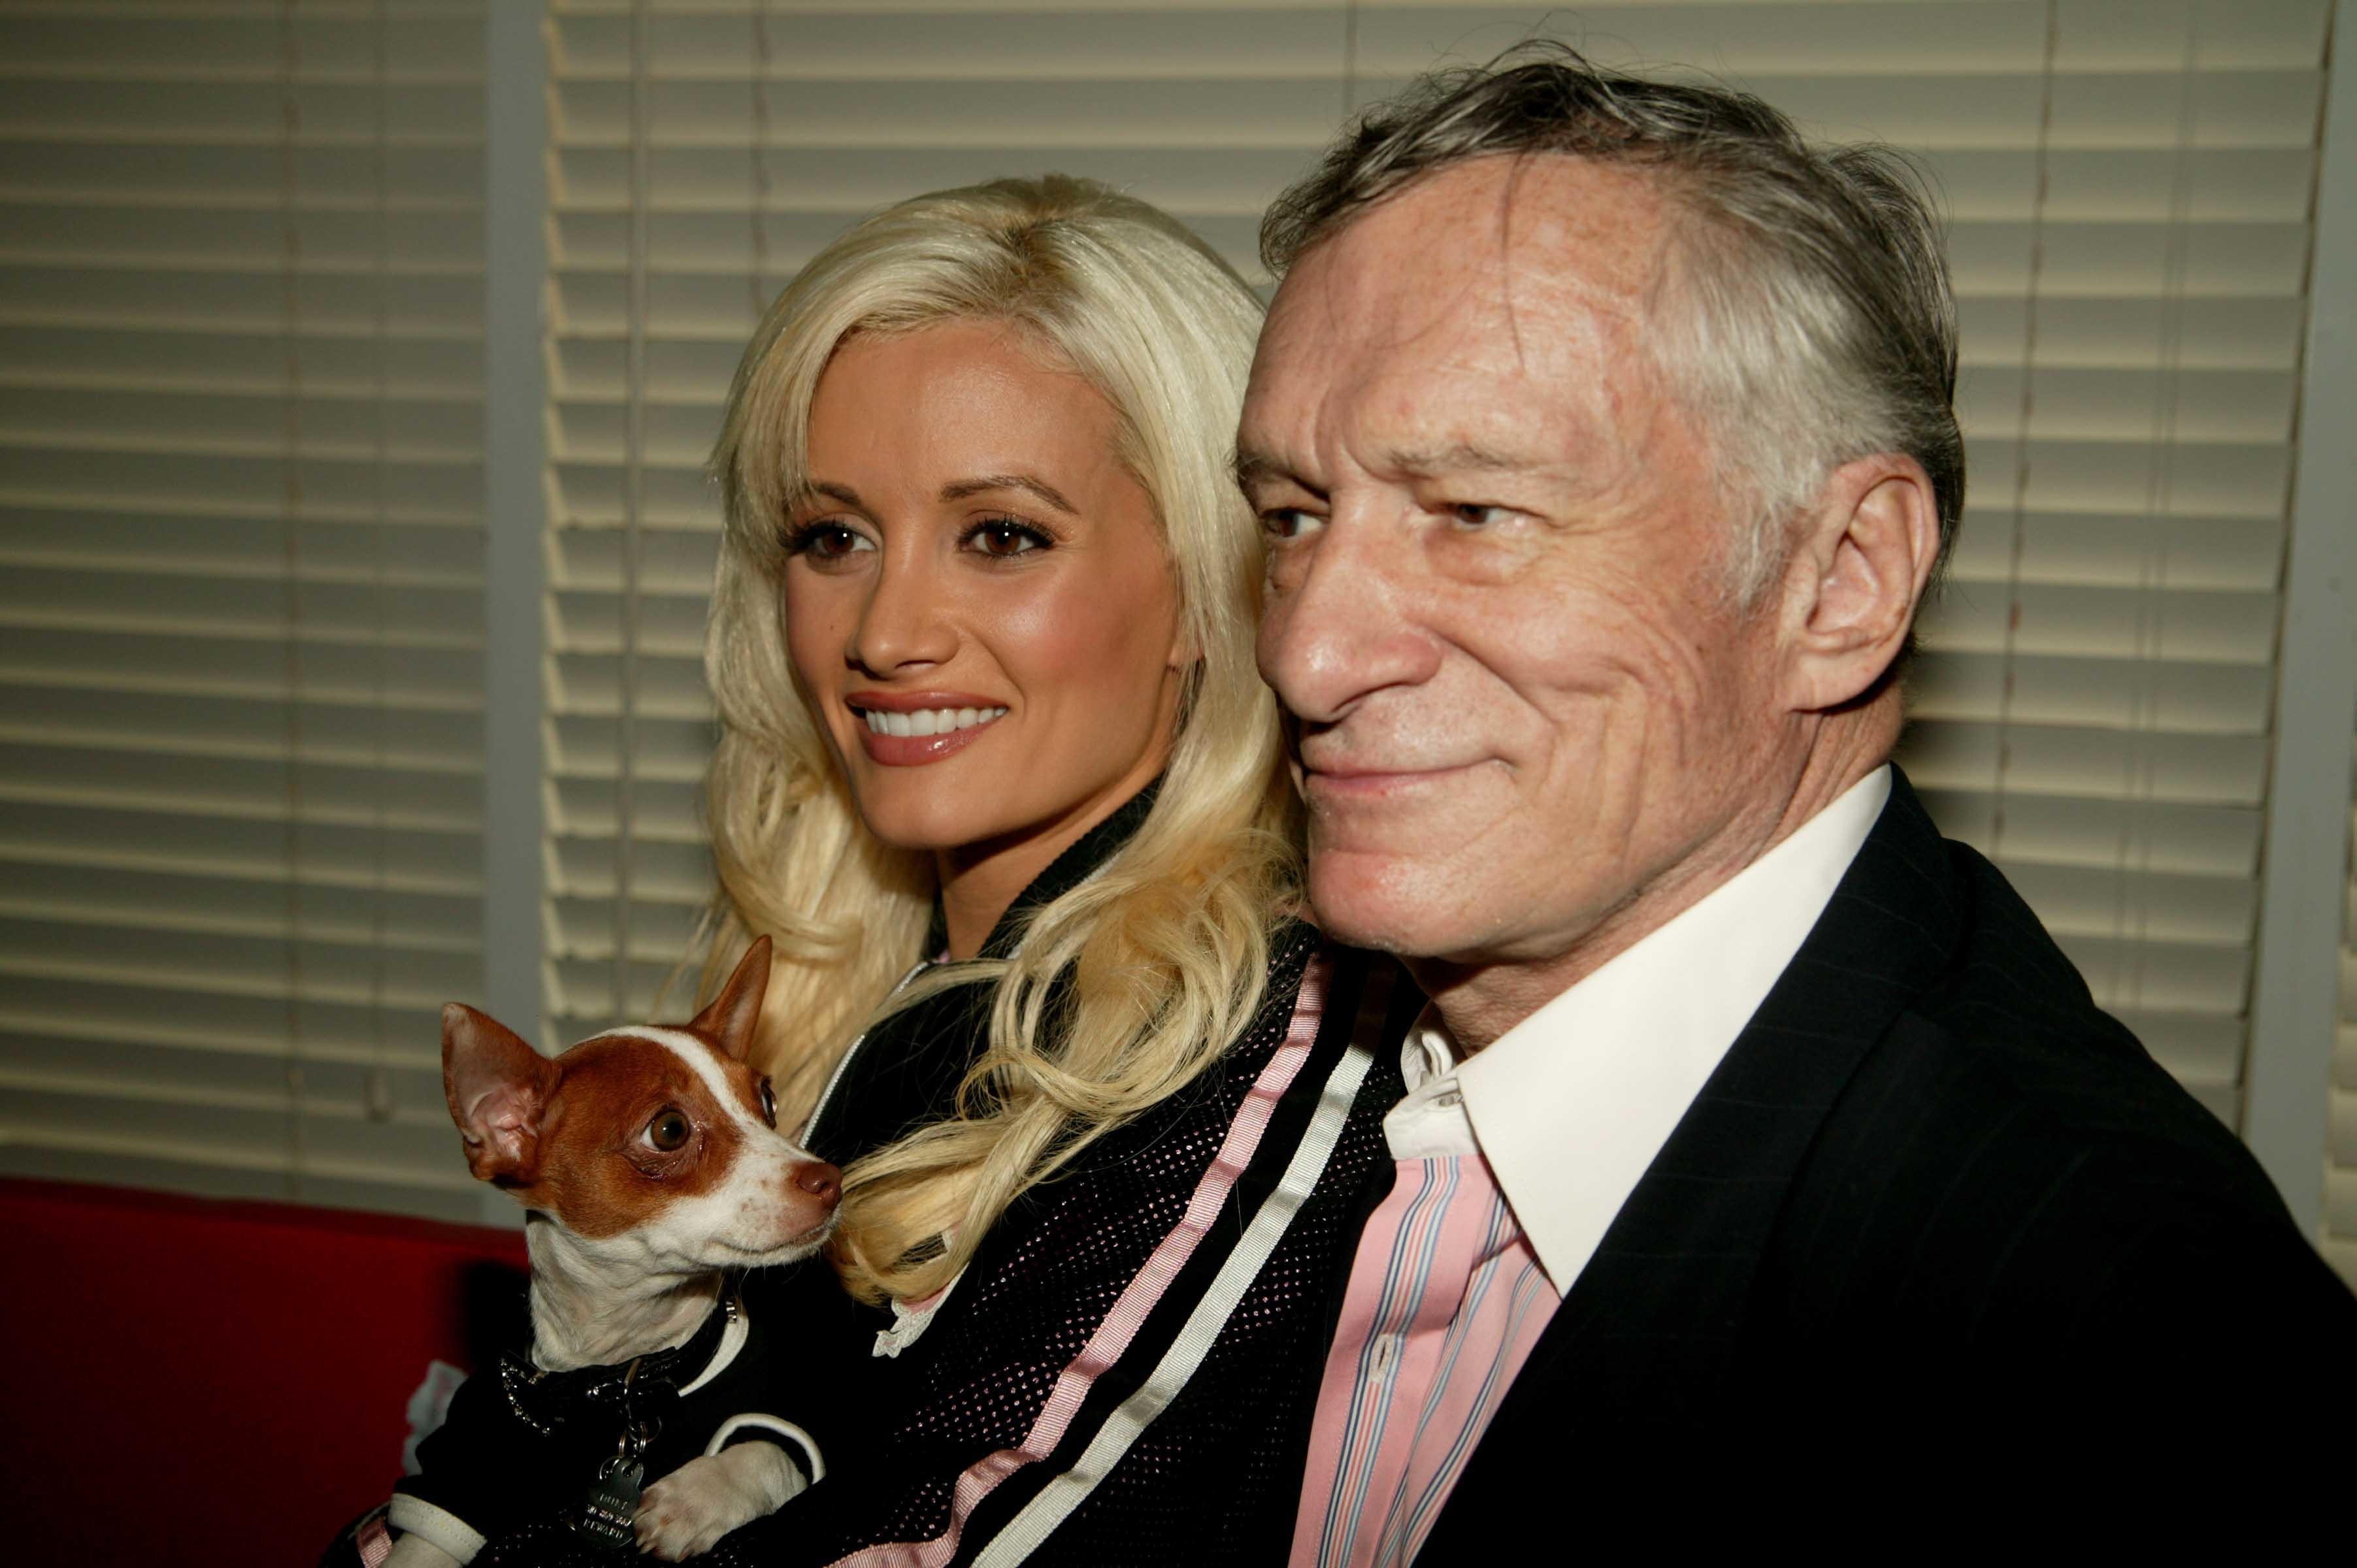 Holly, who is holding a small dog, standing next to Hugh